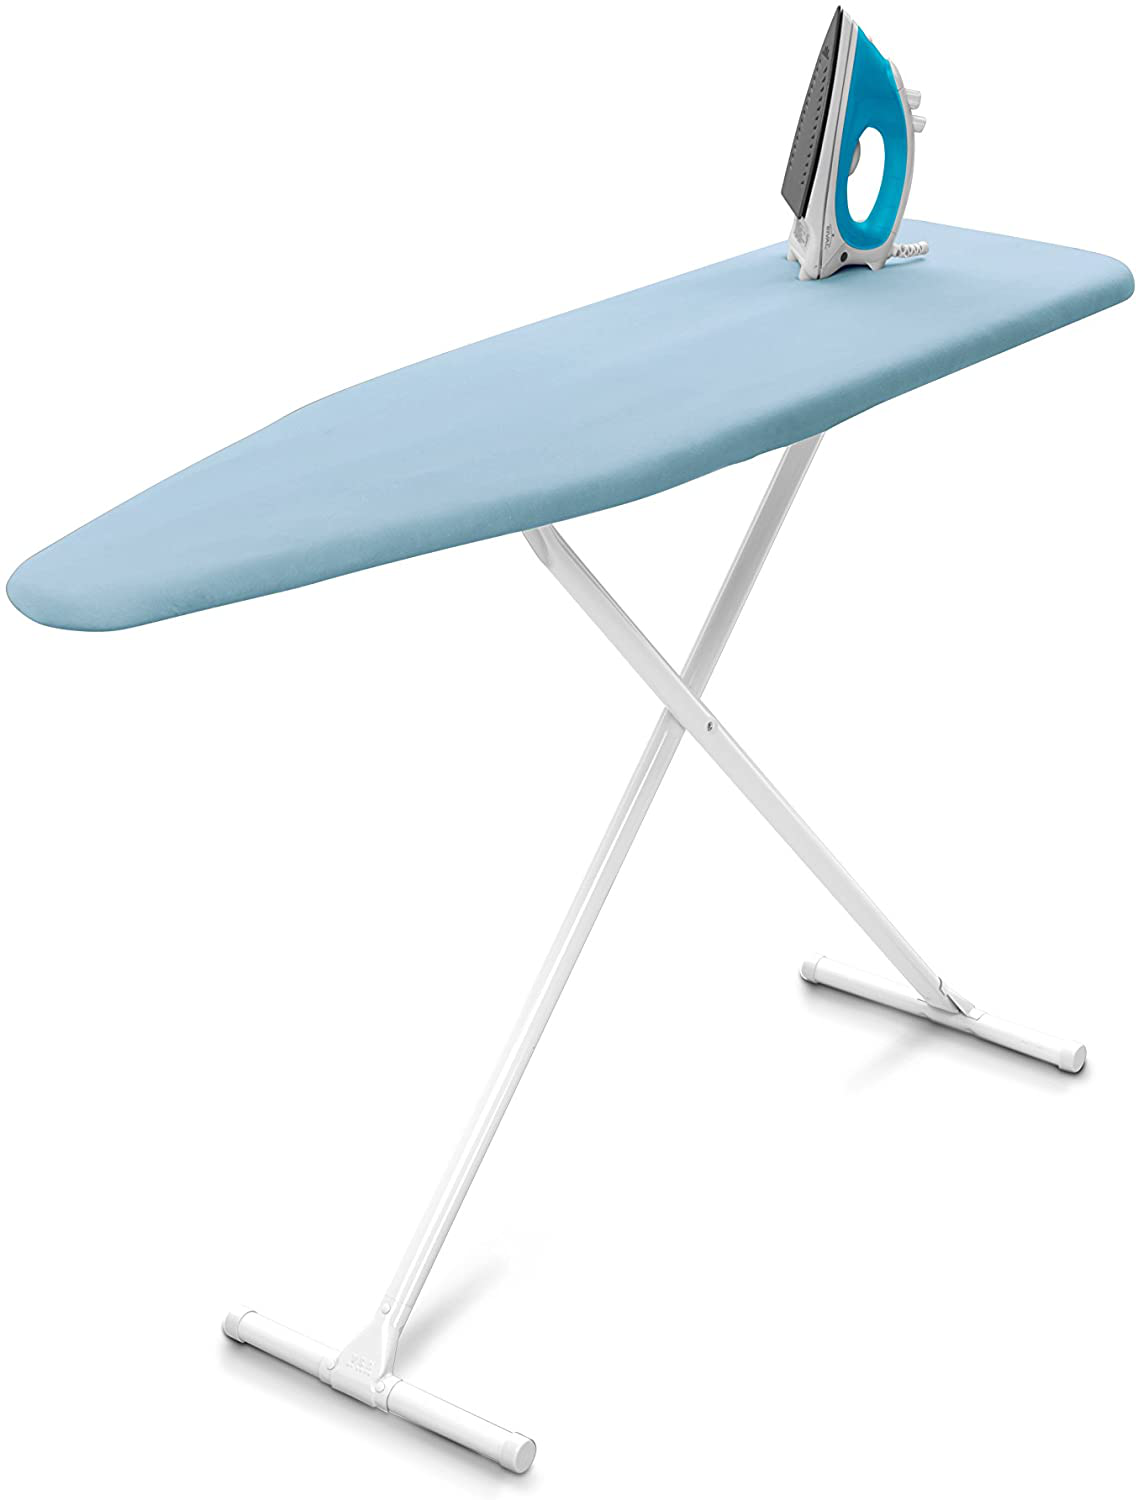 Homz T-Leg Ironing Board, Made in the USA, Blue